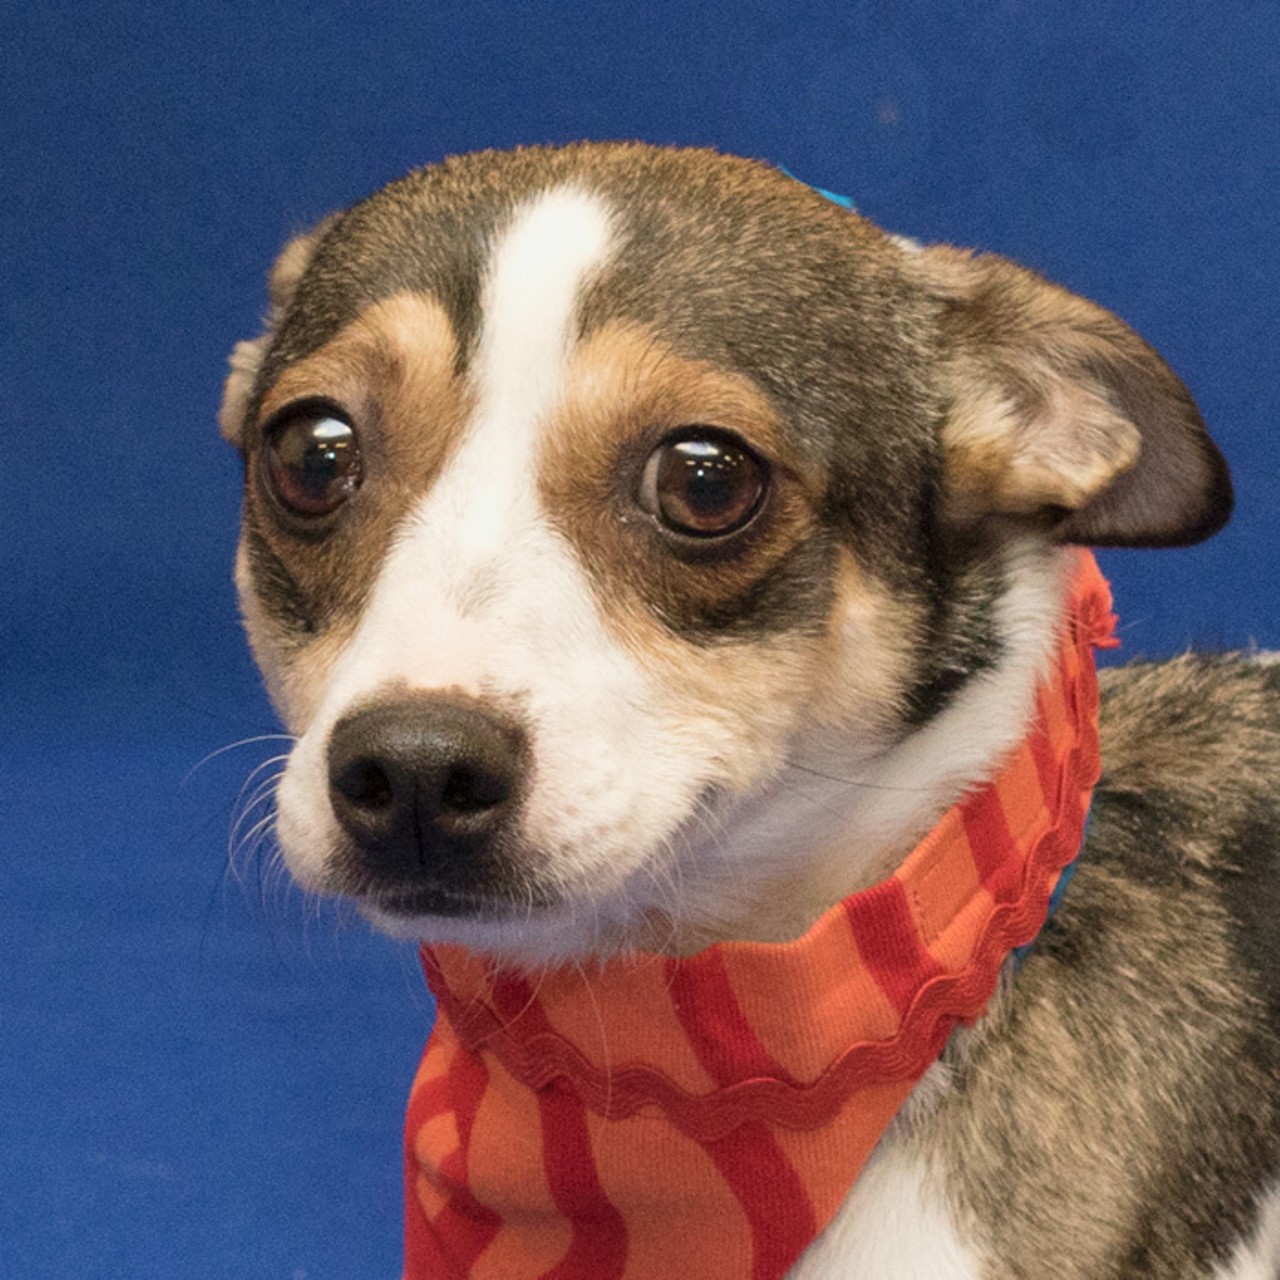 NAME: Sparkles
GENDER: Female
BREED: Jack Russell Terrier
AGE: 6 years, 1 month
WEIGHT: 14 pounds
SPECIAL CONSIDERATIONS: Prefers to be your only pet
REASON I CAME TO MHS: Homeless in Westland
LOCATION: Petco of Sterling Heights
ID NUMBER: 861060